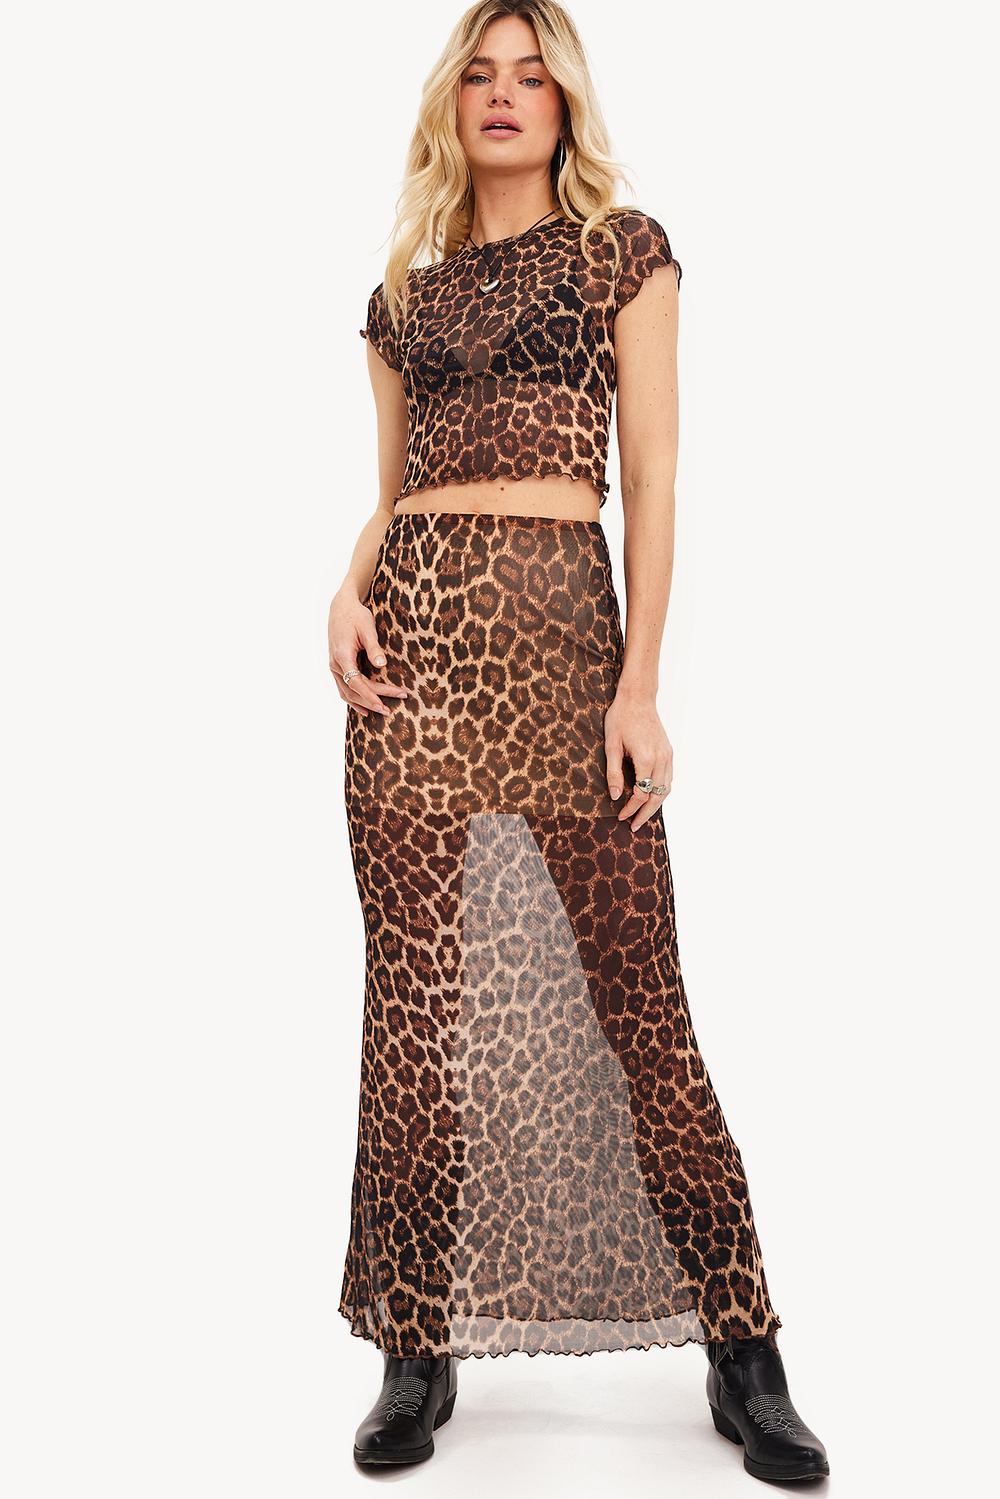 Brown maxi skirt with leopard print